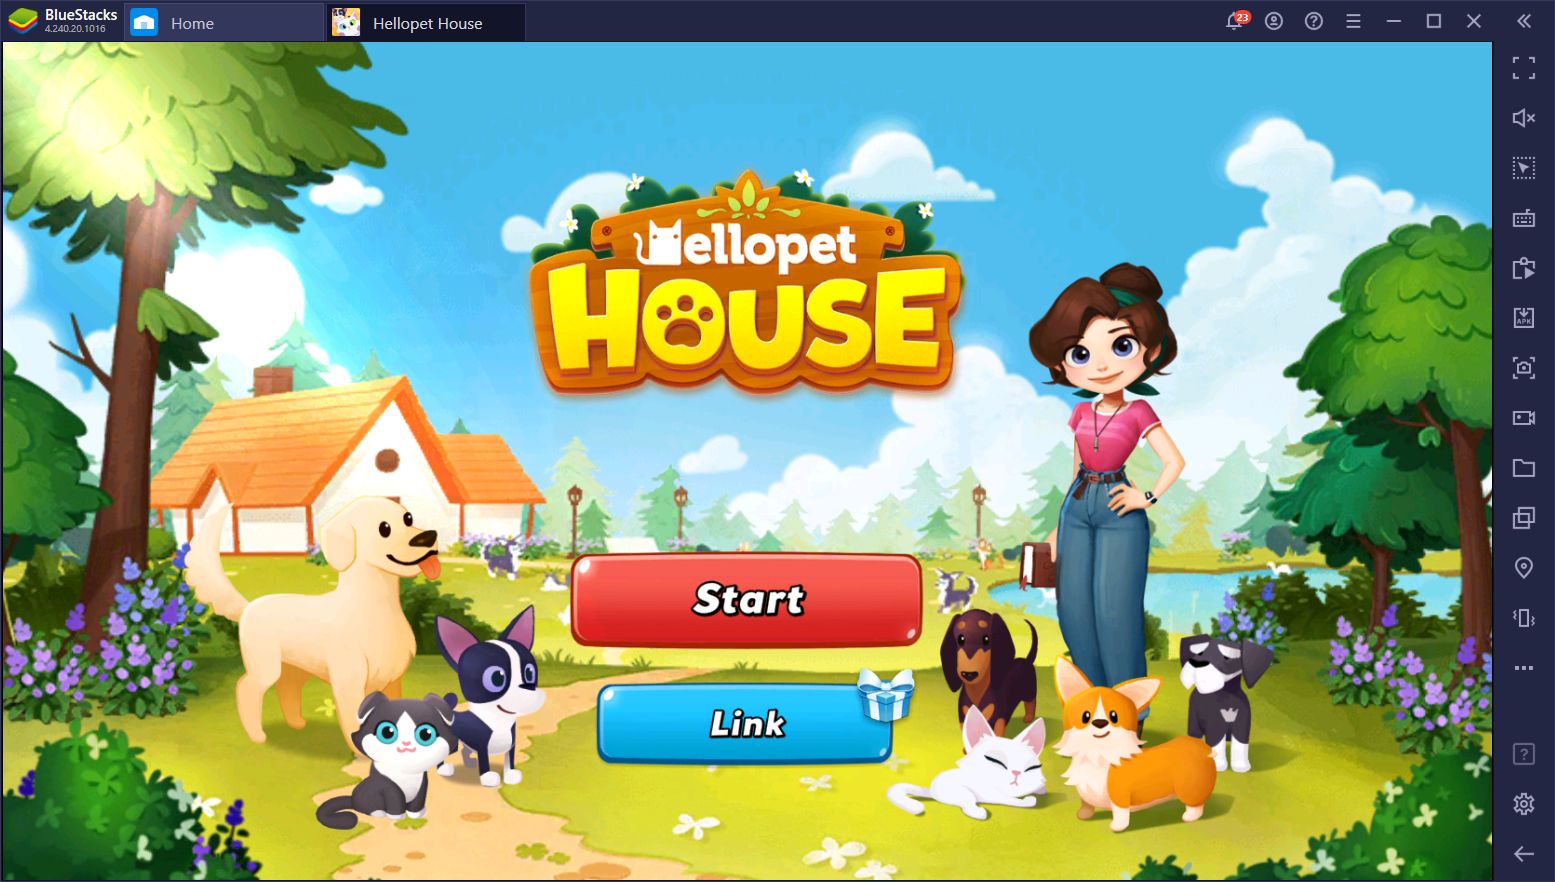 Hellopet House – How to Play This Casual, Lighthearted Mobile Game on PC With BlueStacks